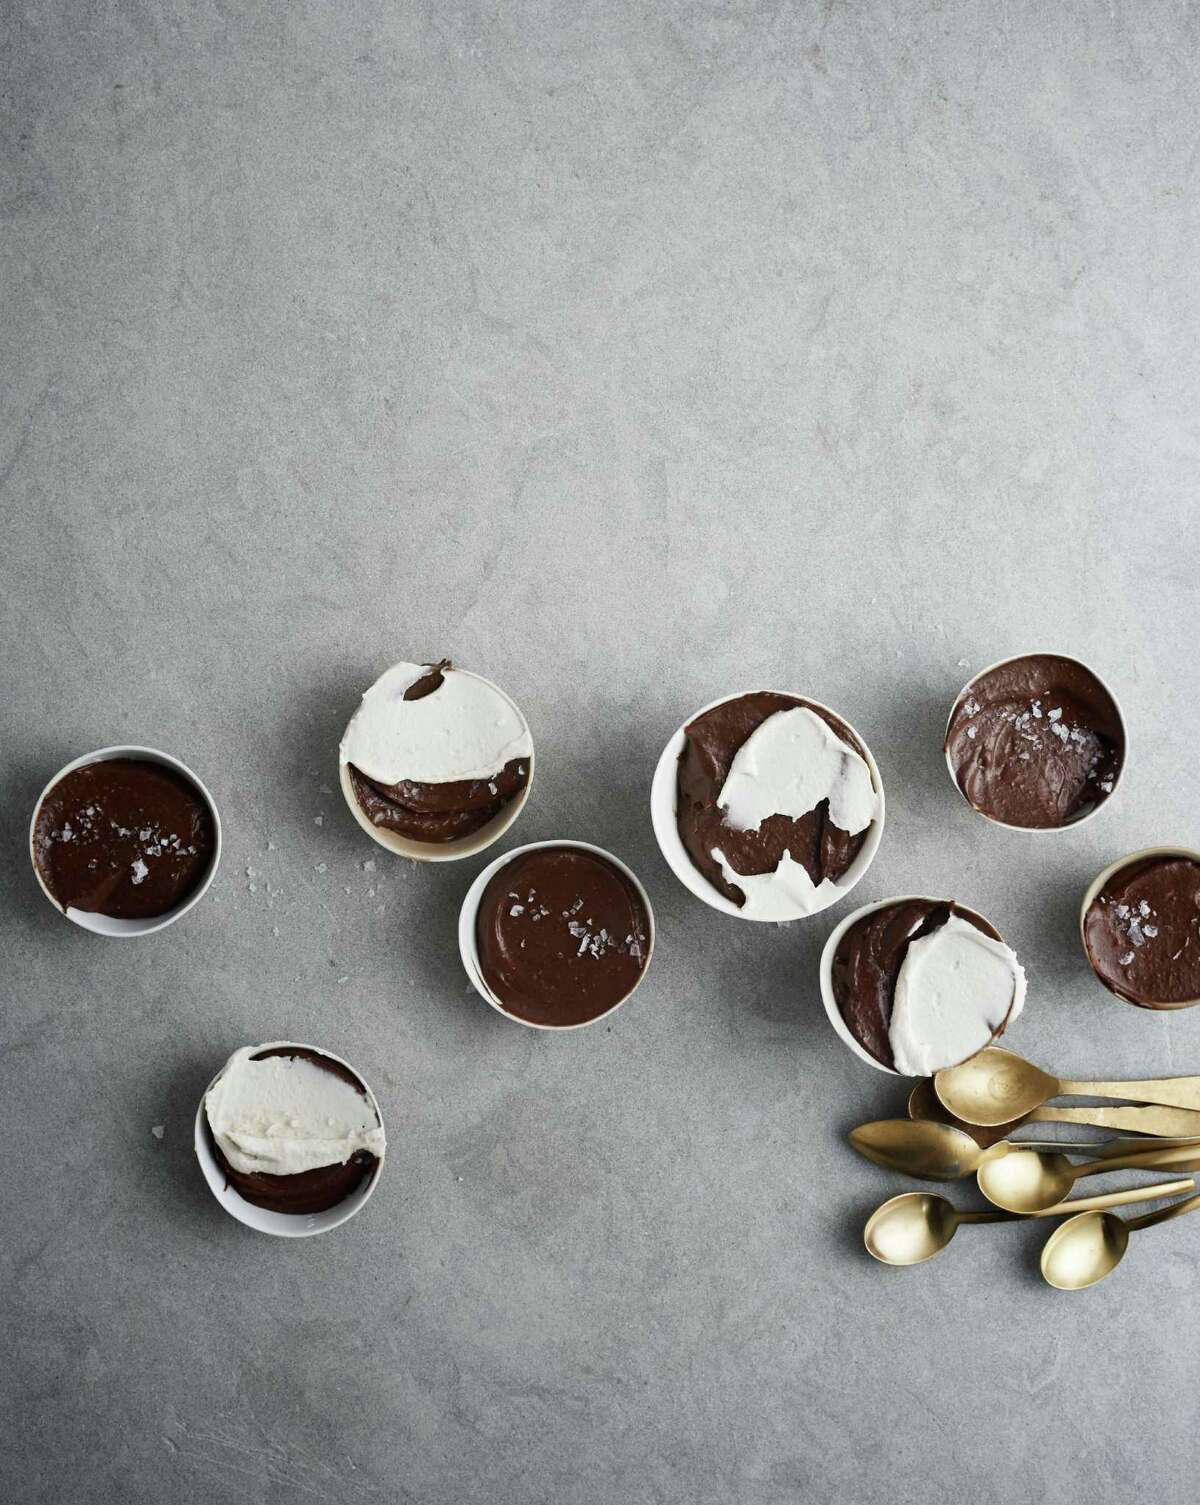 Chocolate Mousse from Gwyneth Paltrow's latest cookbook, "It's All Easy."